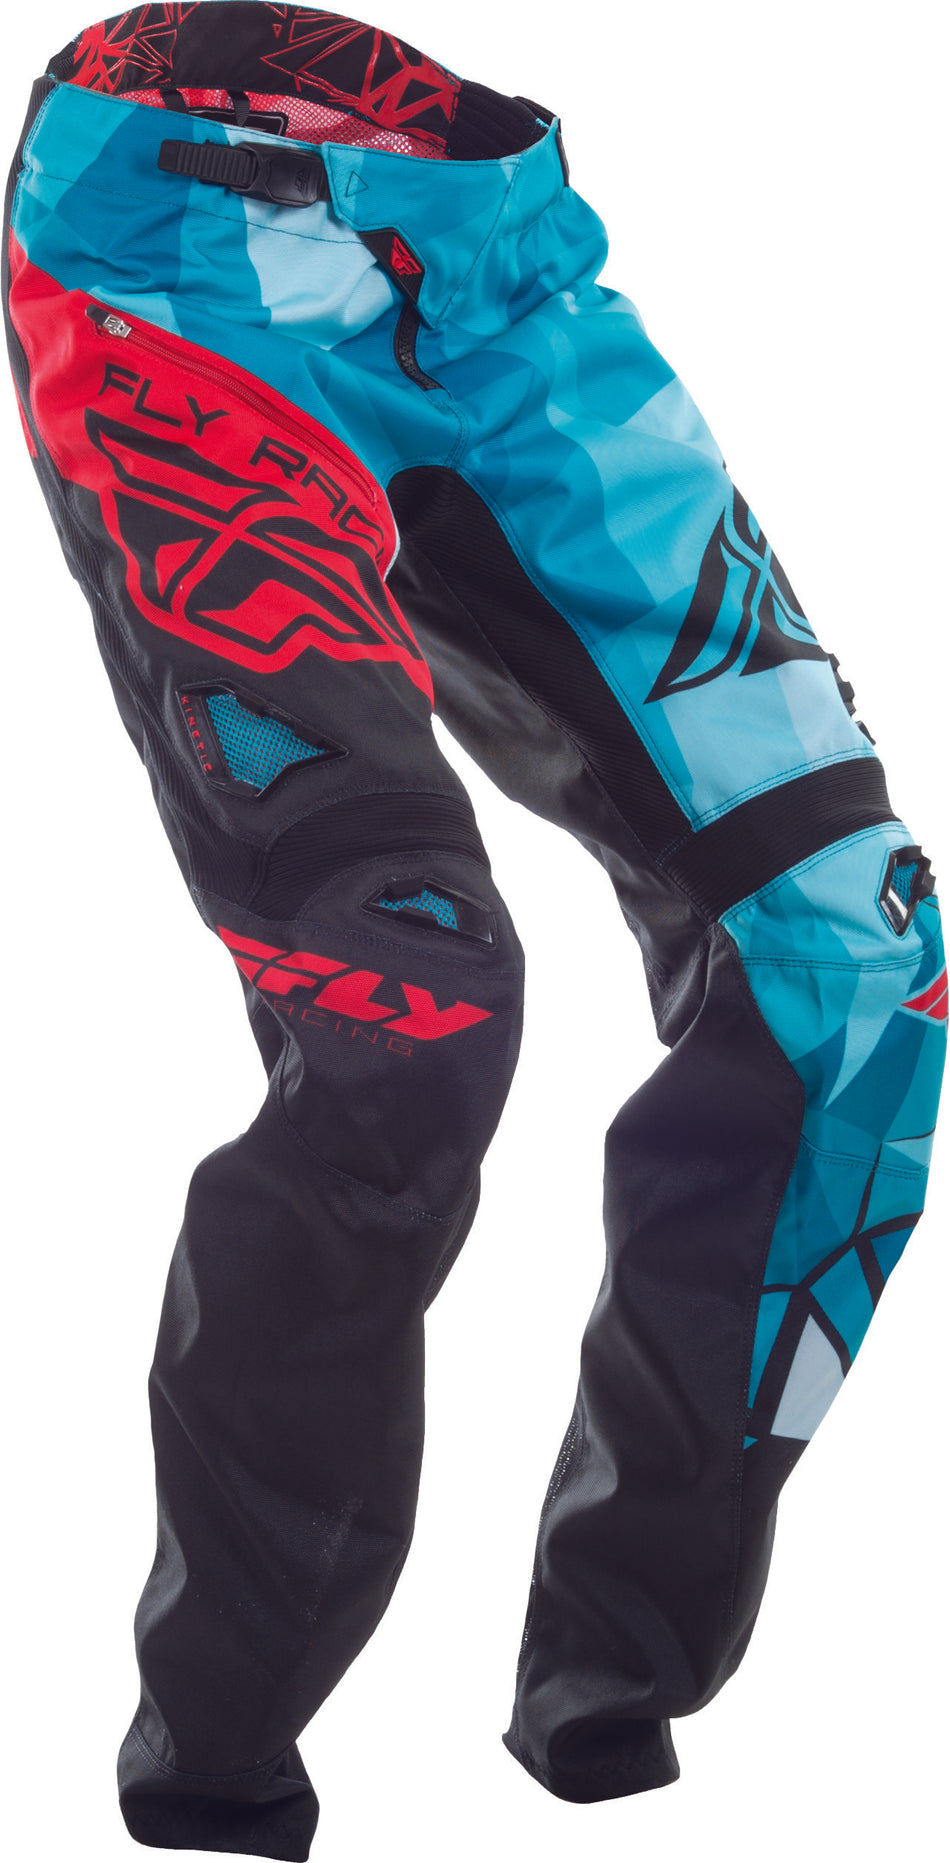 FLY RACING Bicycle Crux Pant Black/Teal/Red Sz 28 370-02928